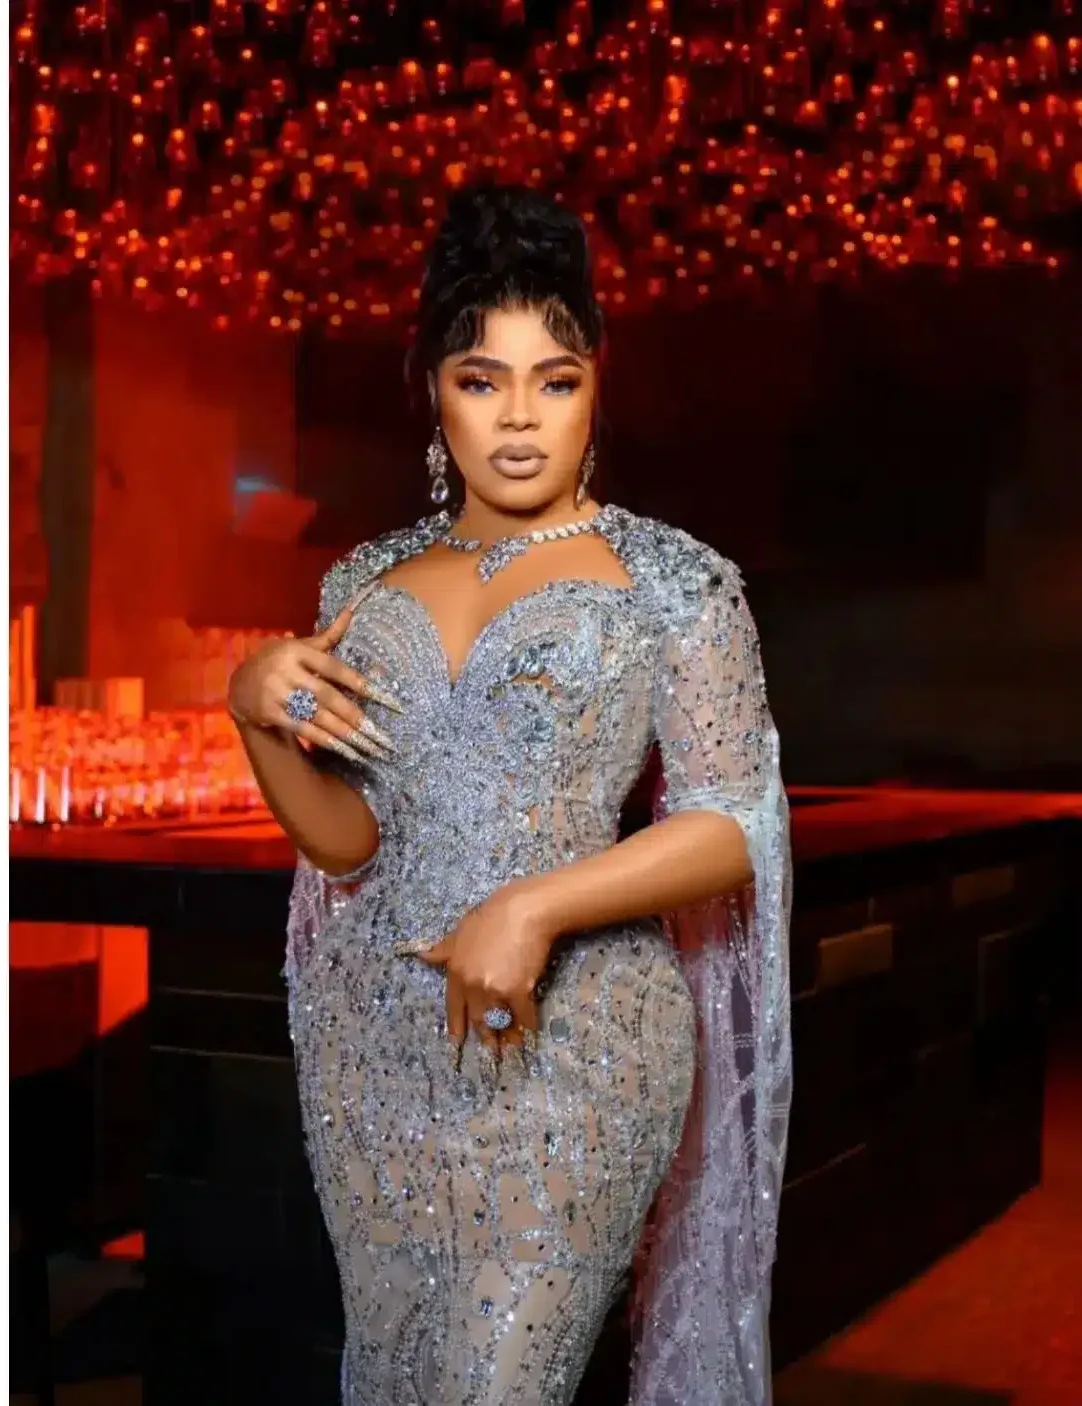 "Mainland people are too local" - Bobrisky shares bitter experience